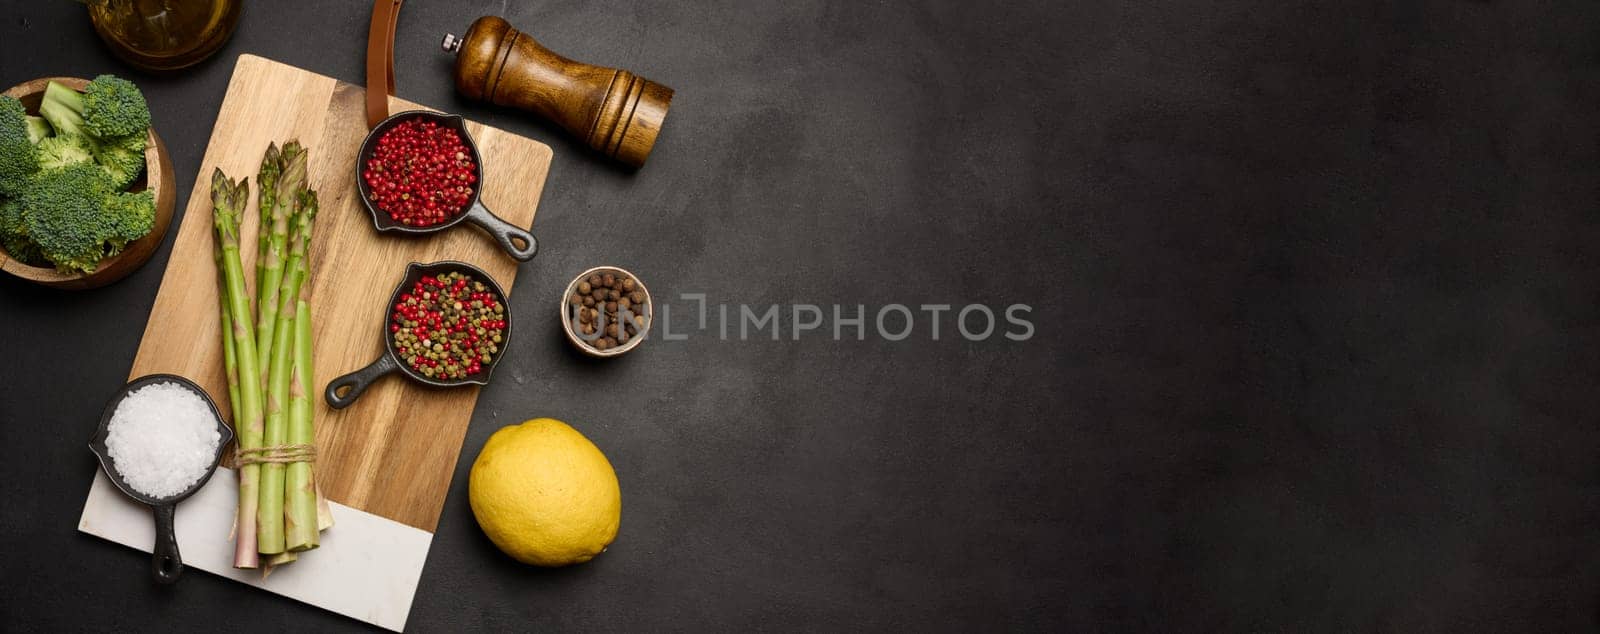 Raw asparagus, broccoli and spices on black background, top view by ndanko